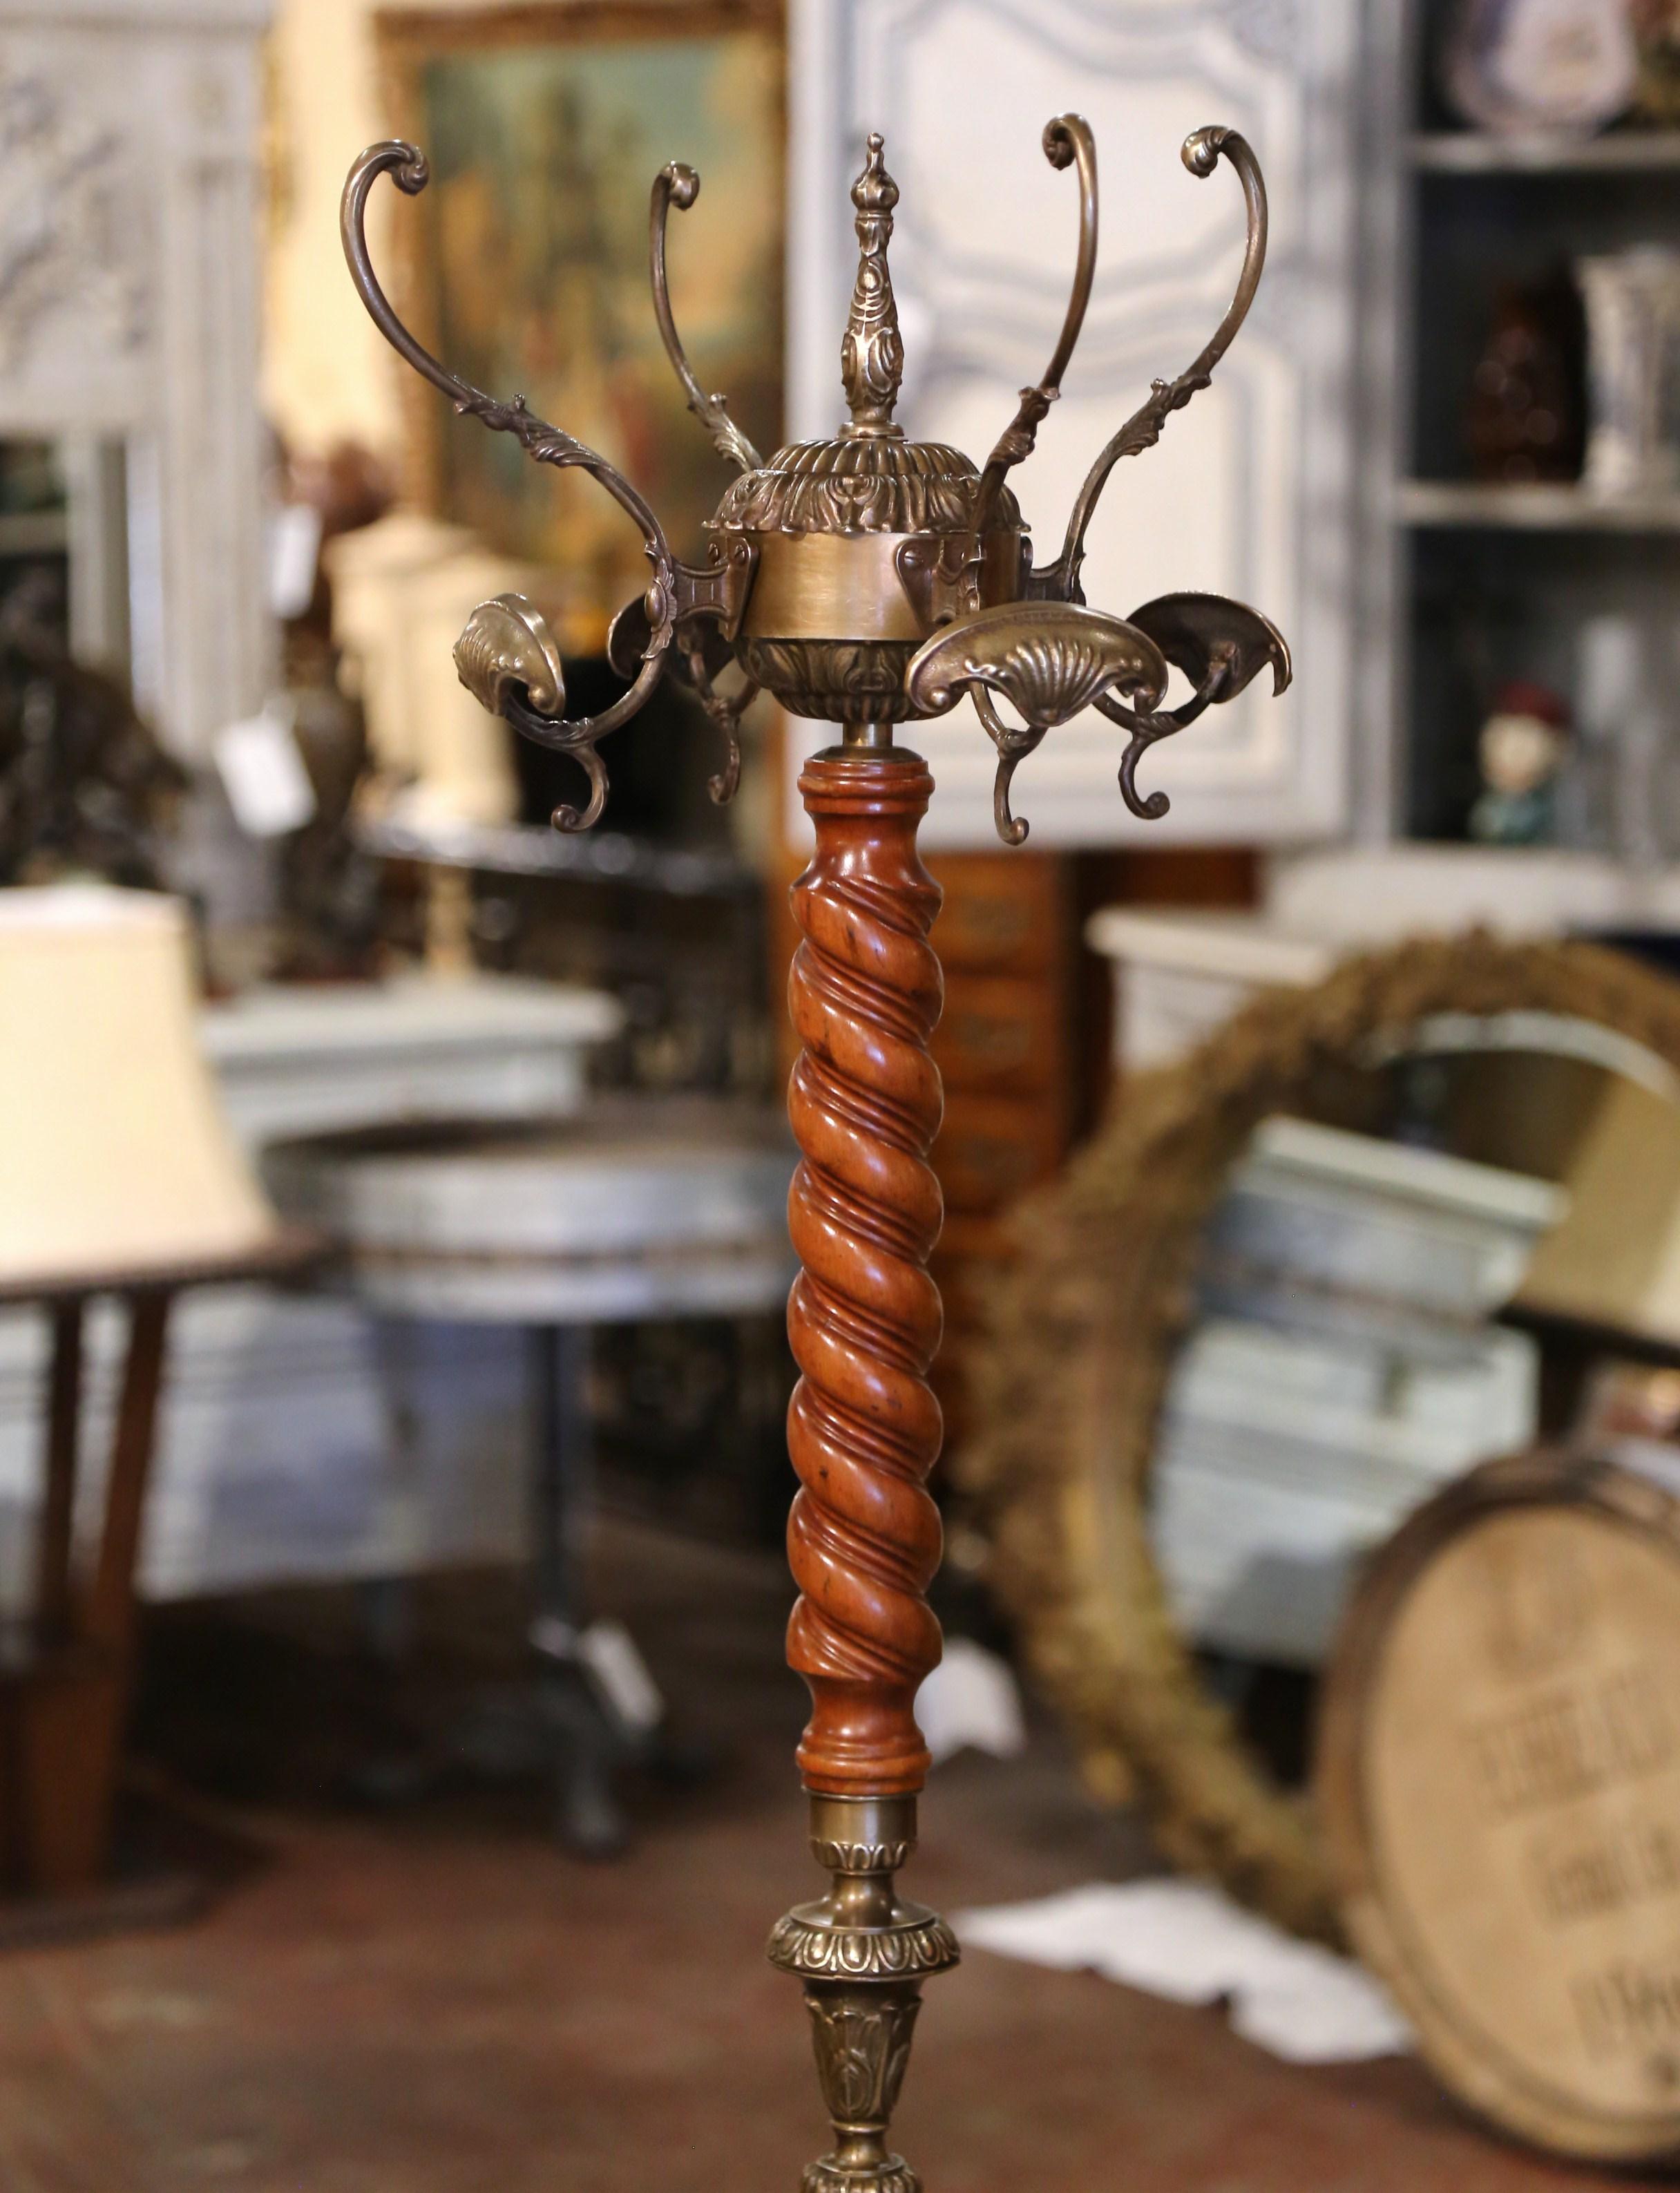 This antique carved fruit wood and brass hall tree was crafted in France, circa 1920. Standing on a wide female caryatid tripod form supports ending in paw feet, the tall rack features a barley twist spiral central stem decorated with brass foliate